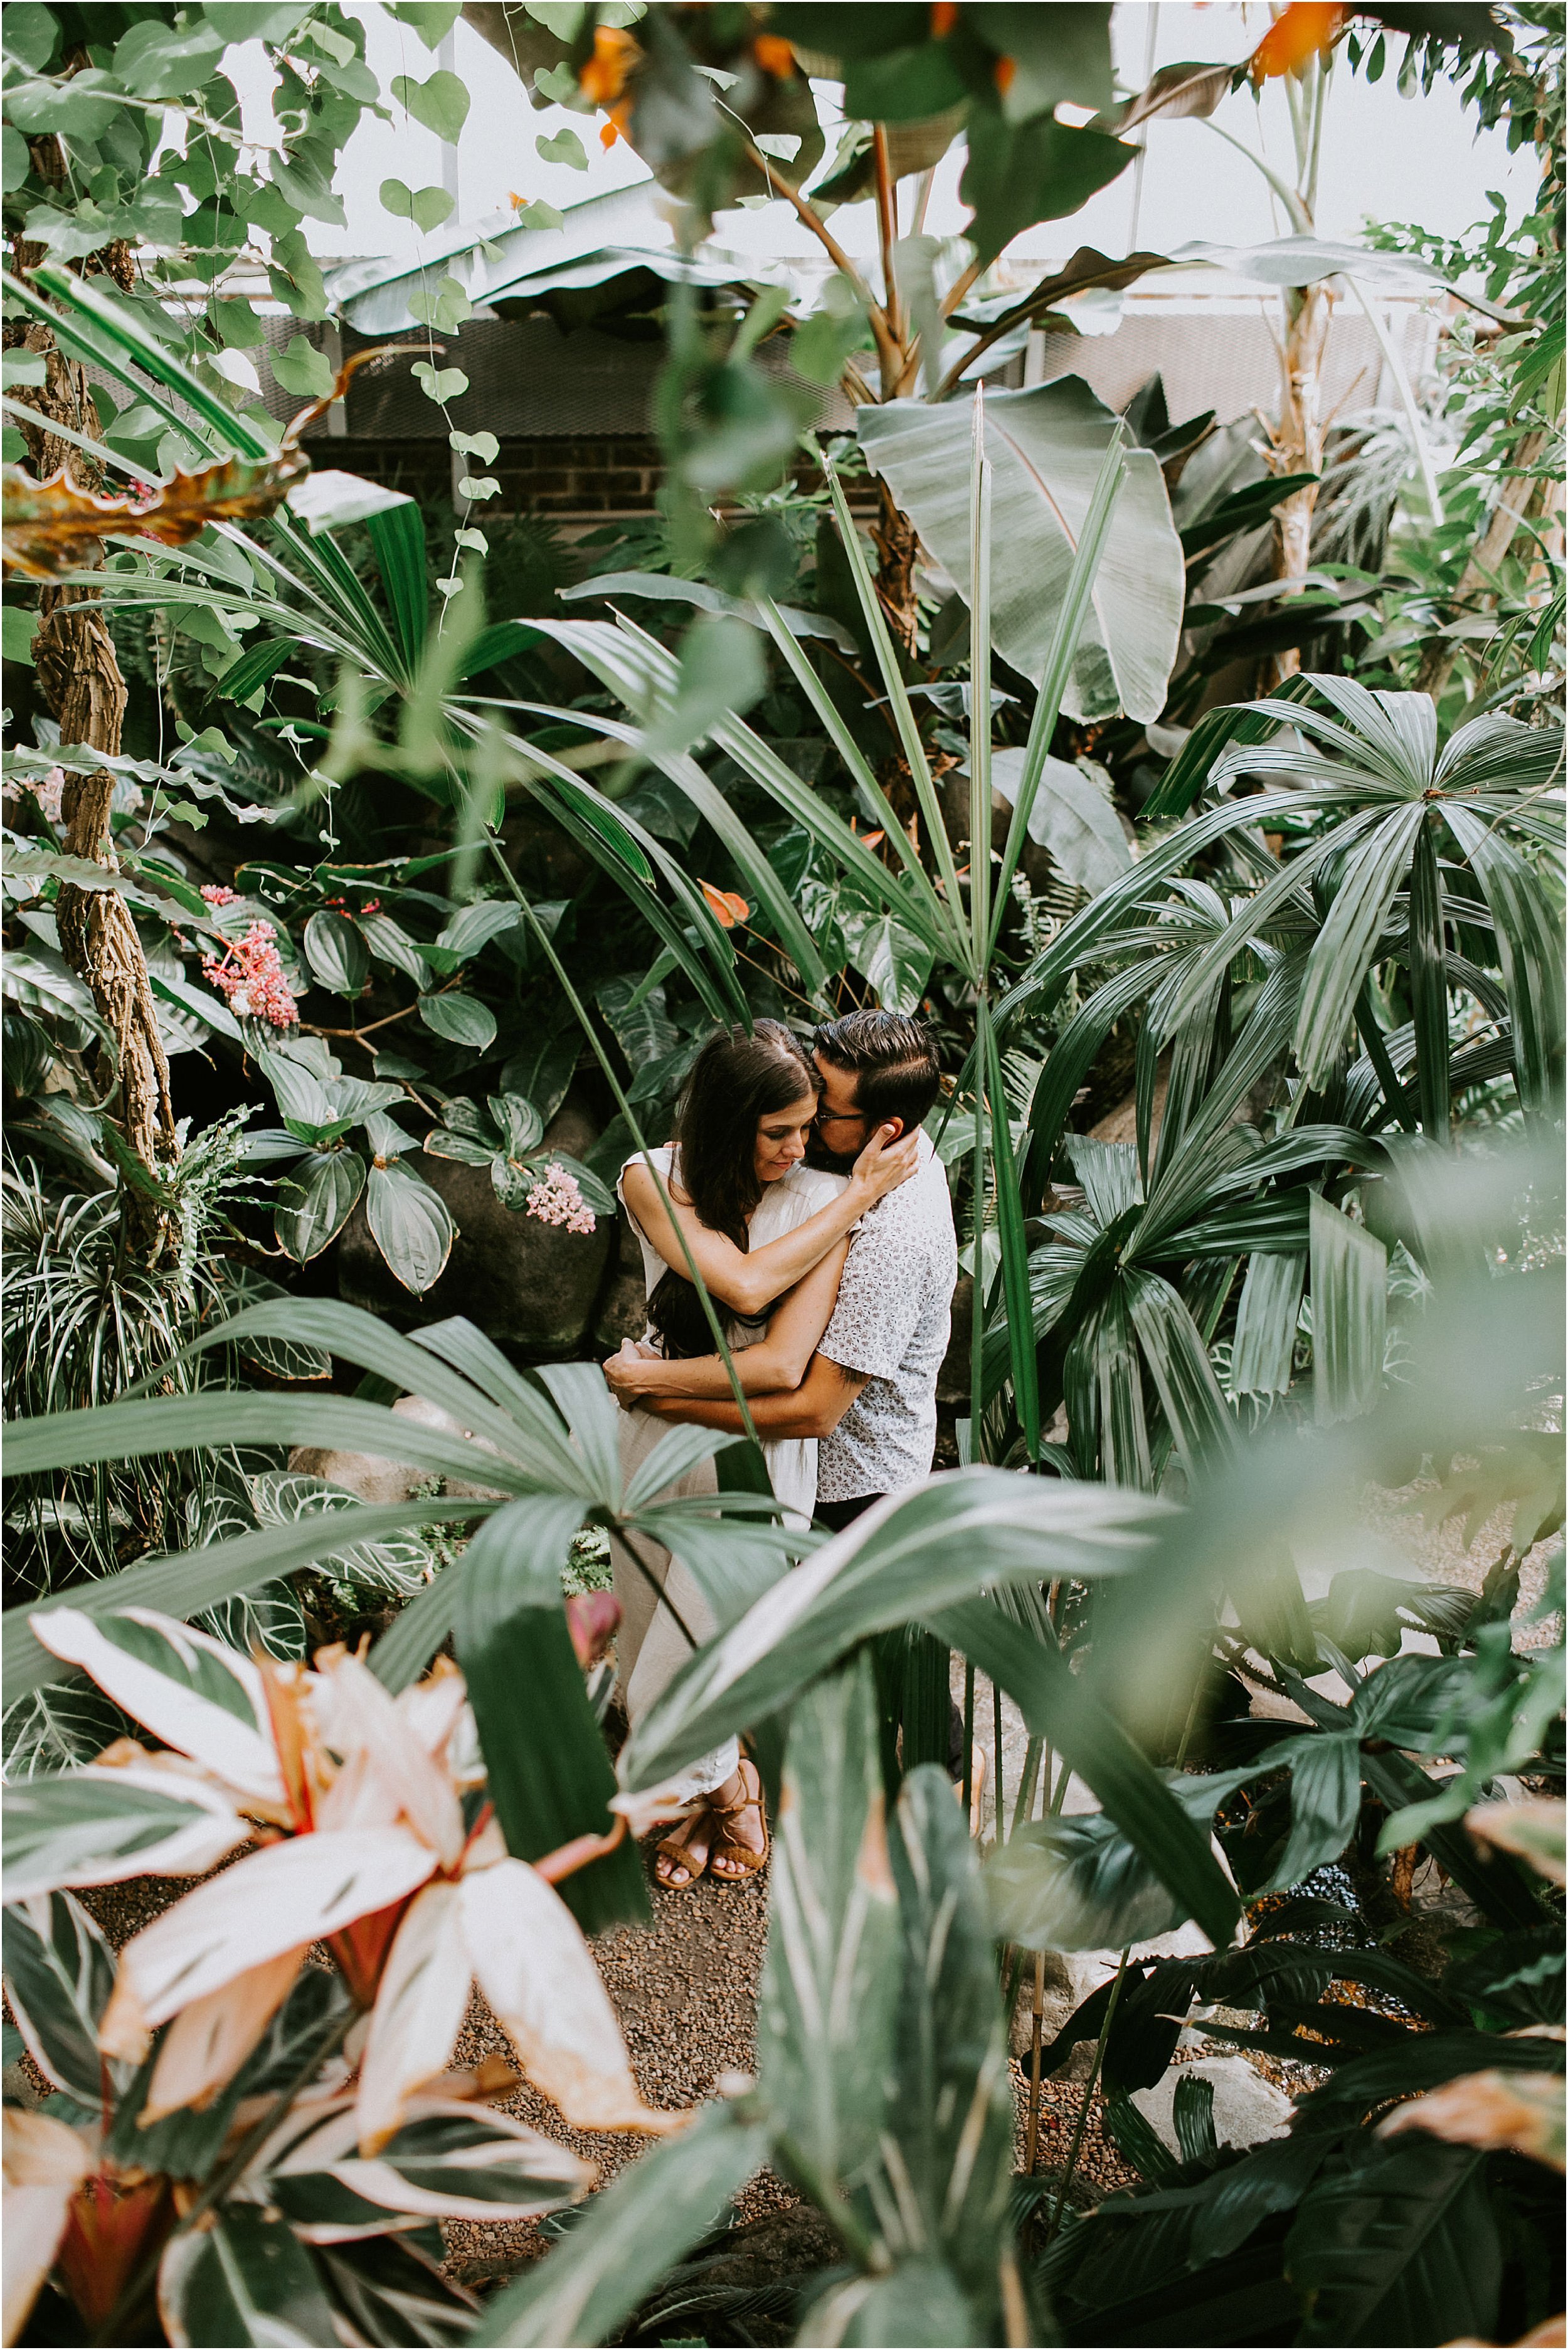  A couple embraces in a greenhouse, completely alone and surrounded by plants. 